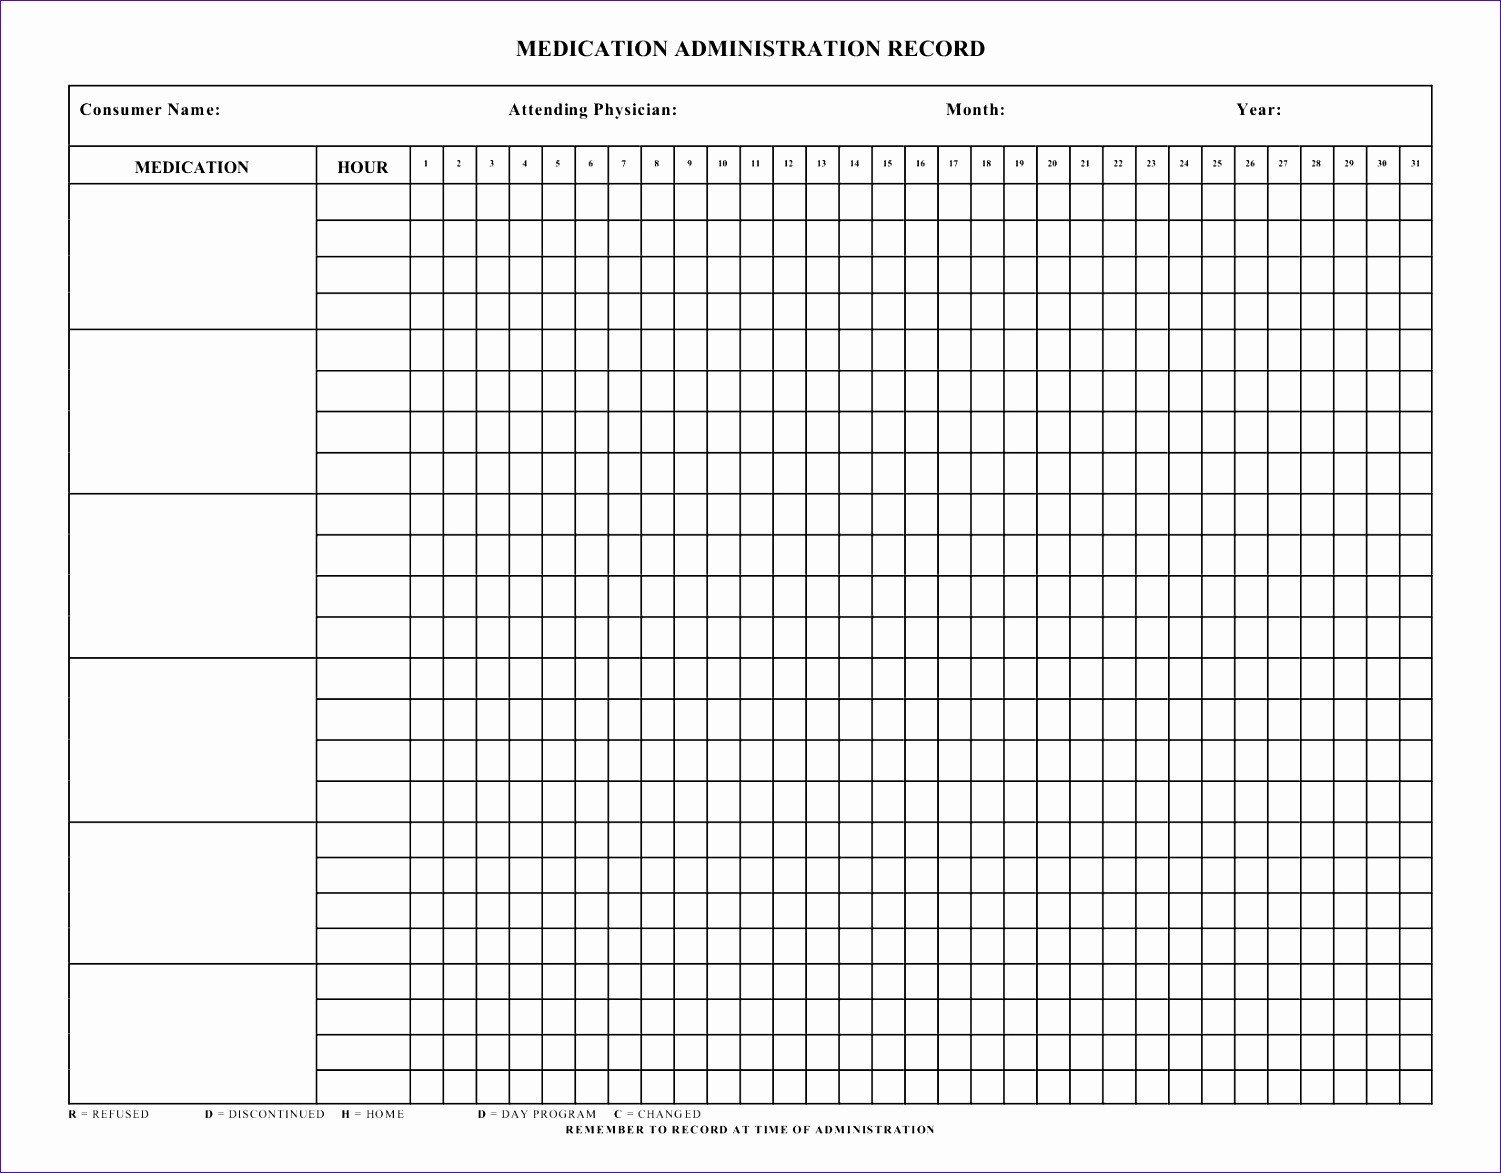 Medication Administration Record Template Pdf 6 Swim Lane Diagram Template Excel Exceltemplates